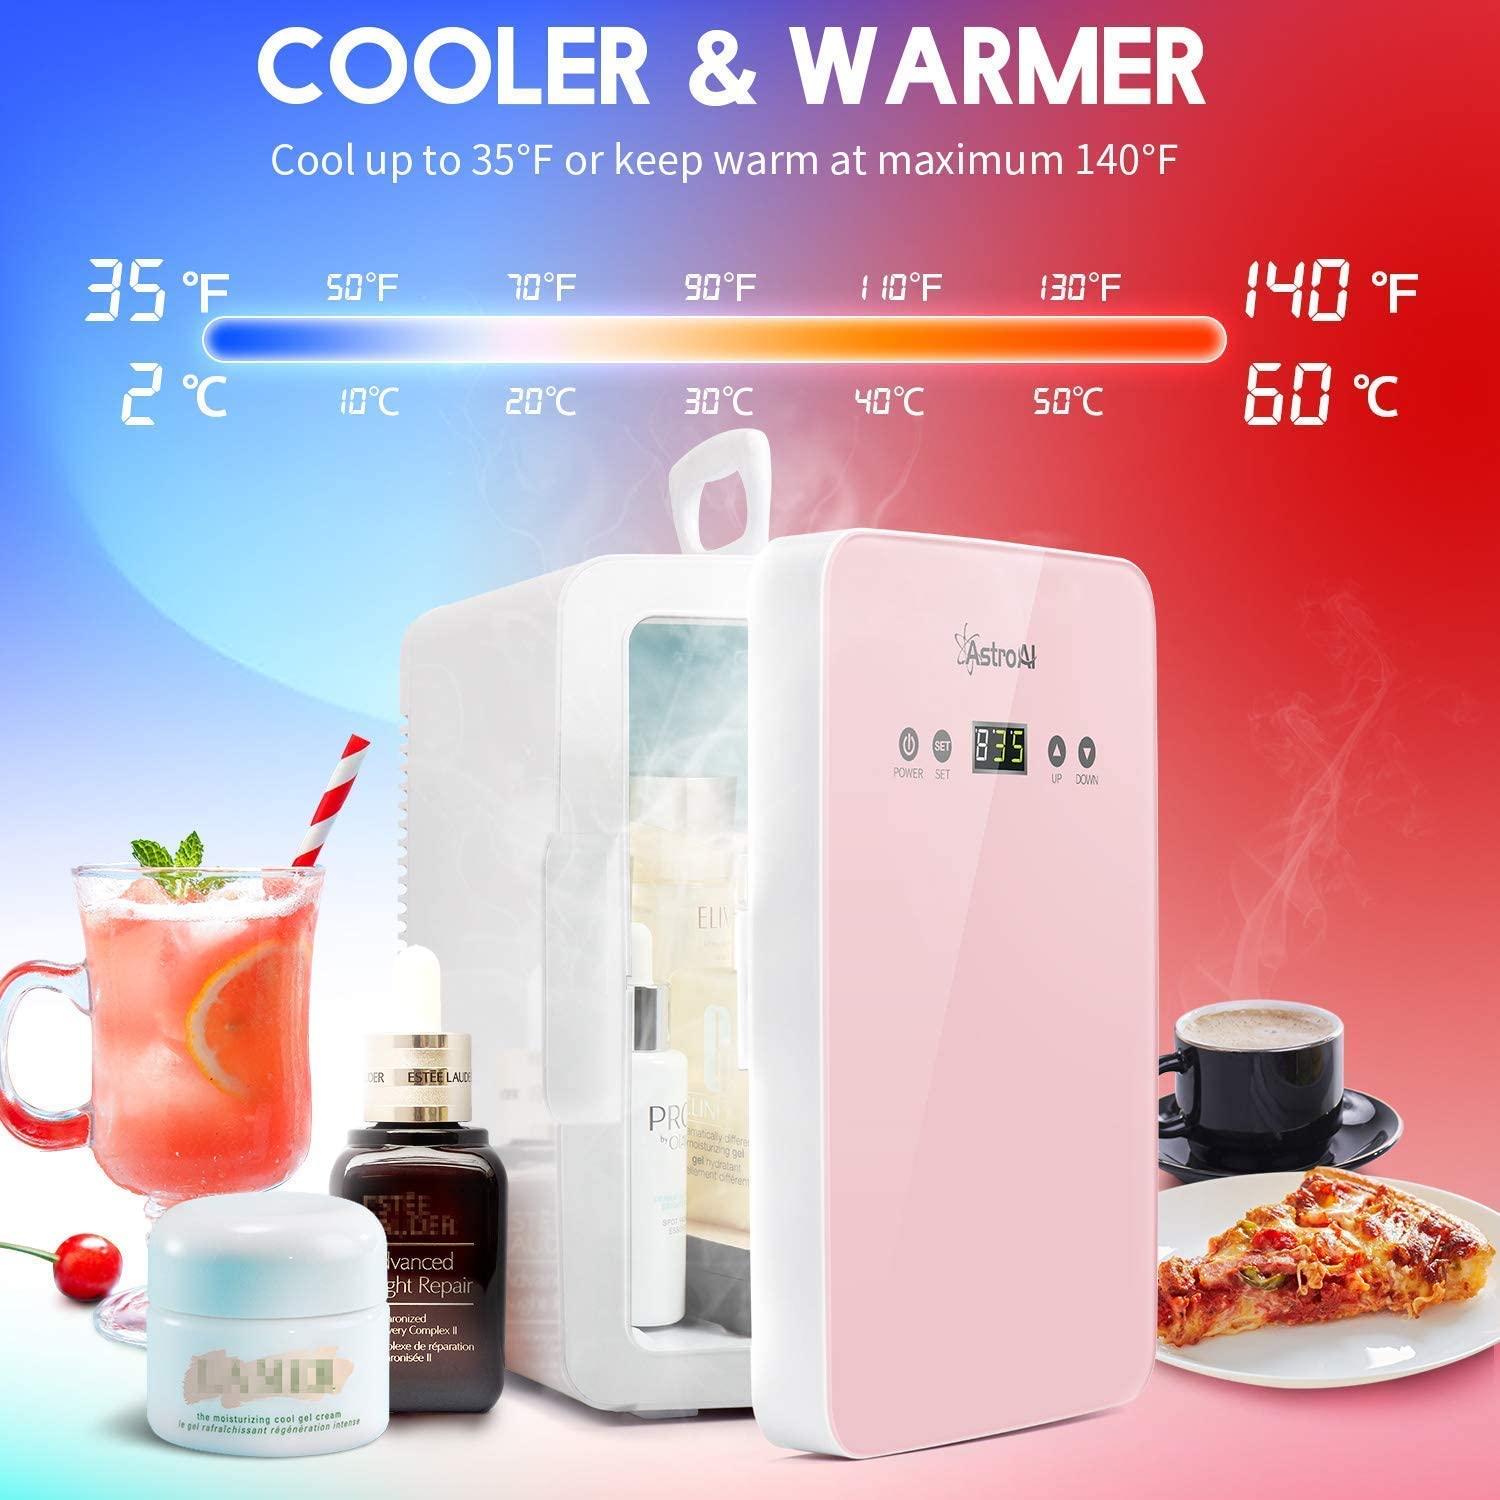 10 BEST SKINCARE MINI FRIDGE FOR BEAUTY 2022 REVIEWS ON AMAZON All In One Cooling Gear Lab: Any Refrigerators Air Conditioners Freezers Ice Makers Coolers Fans Reviewed And Compared.